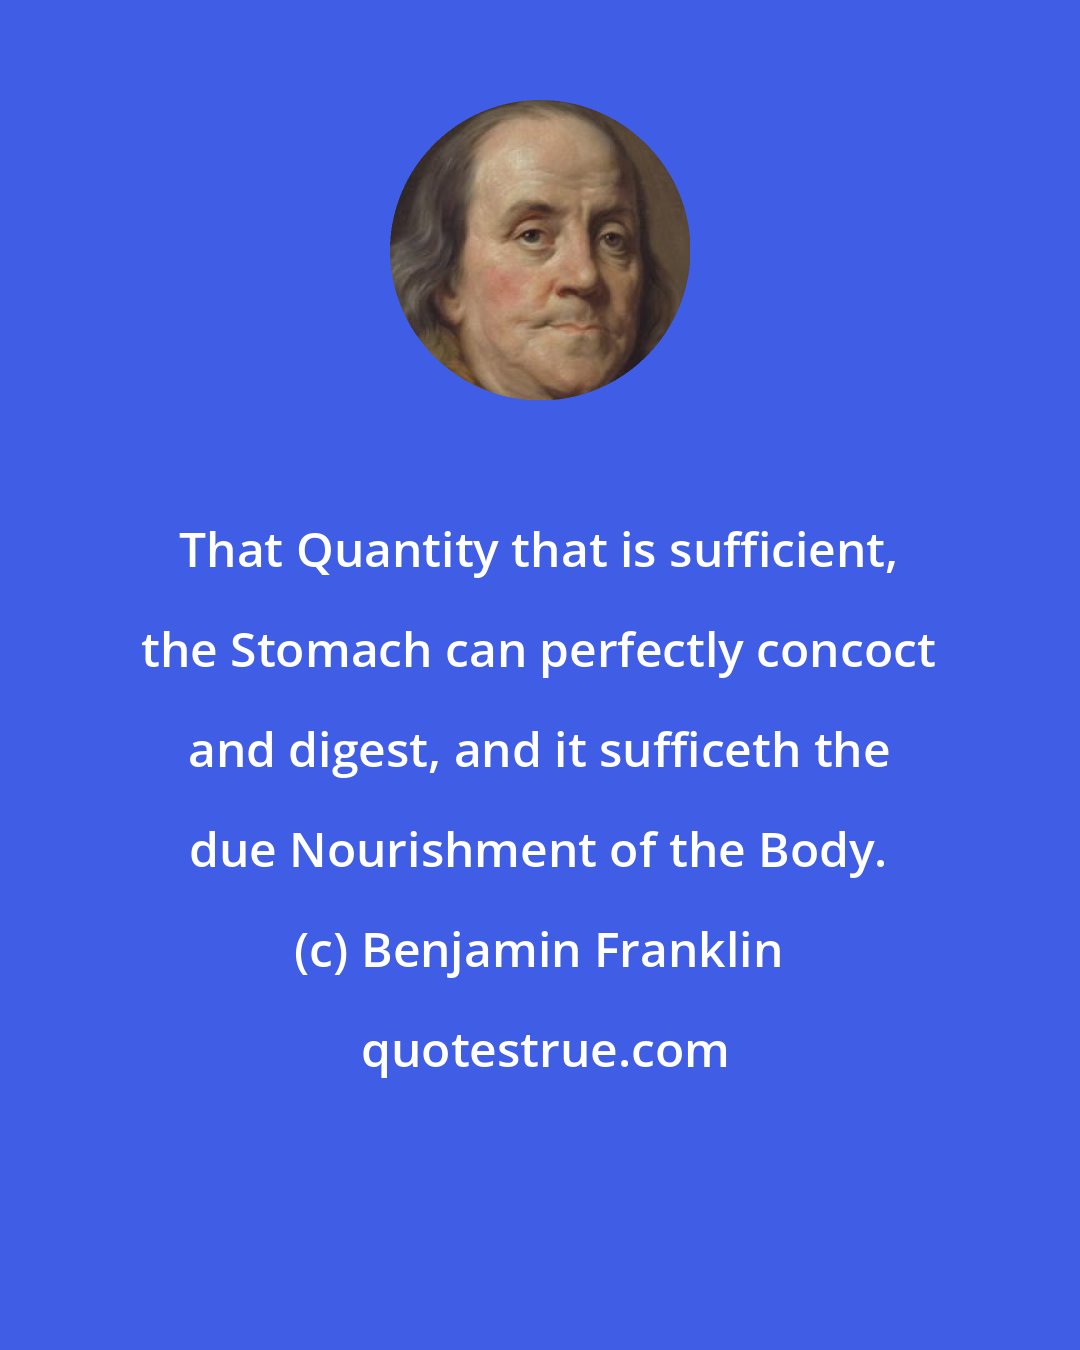 Benjamin Franklin: That Quantity that is sufficient, the Stomach can perfectly concoct and digest, and it sufficeth the due Nourishment of the Body.